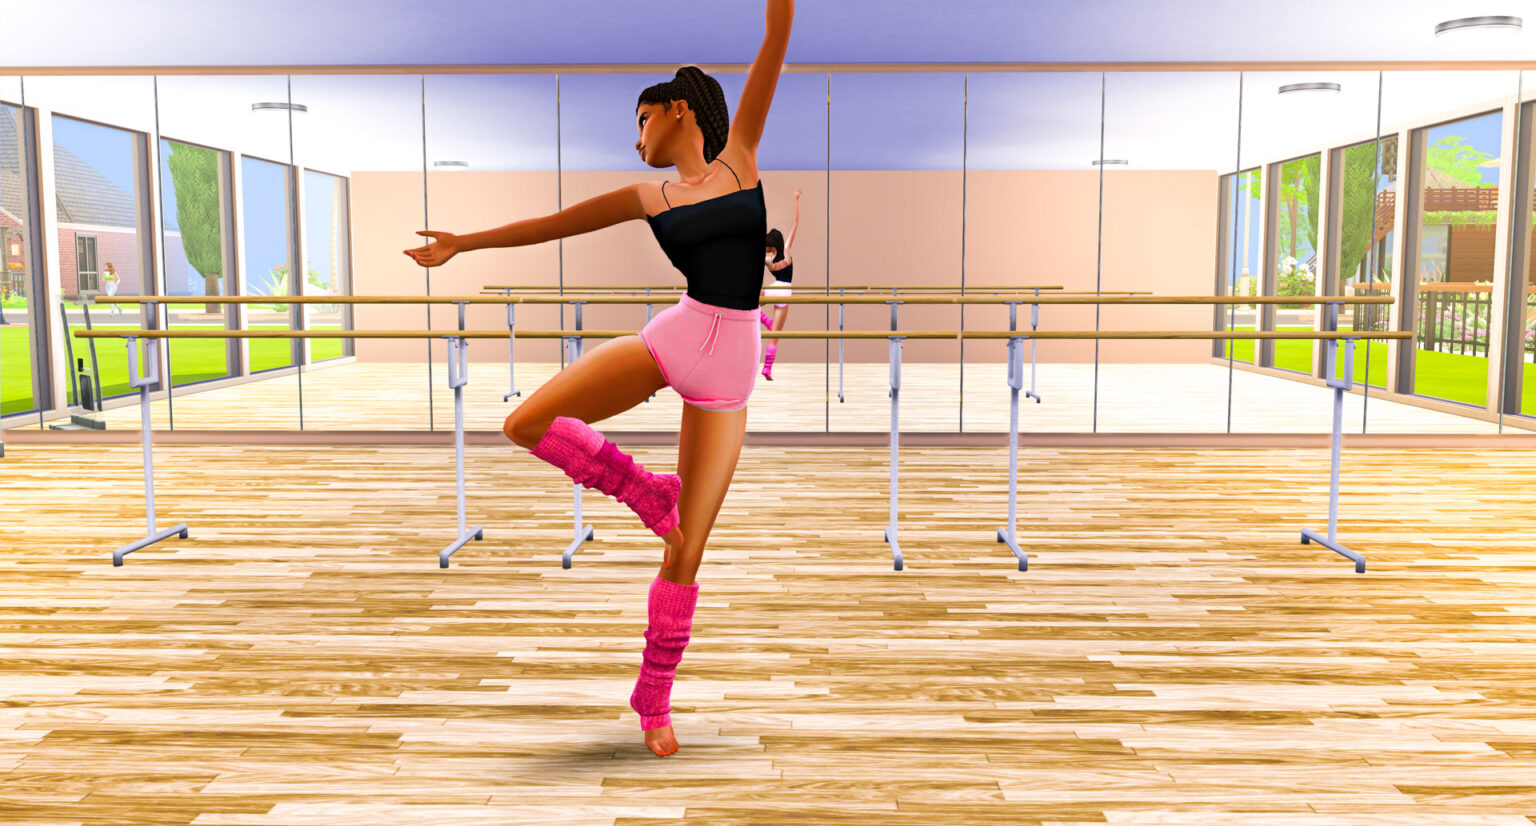 sims 4 dance animations download